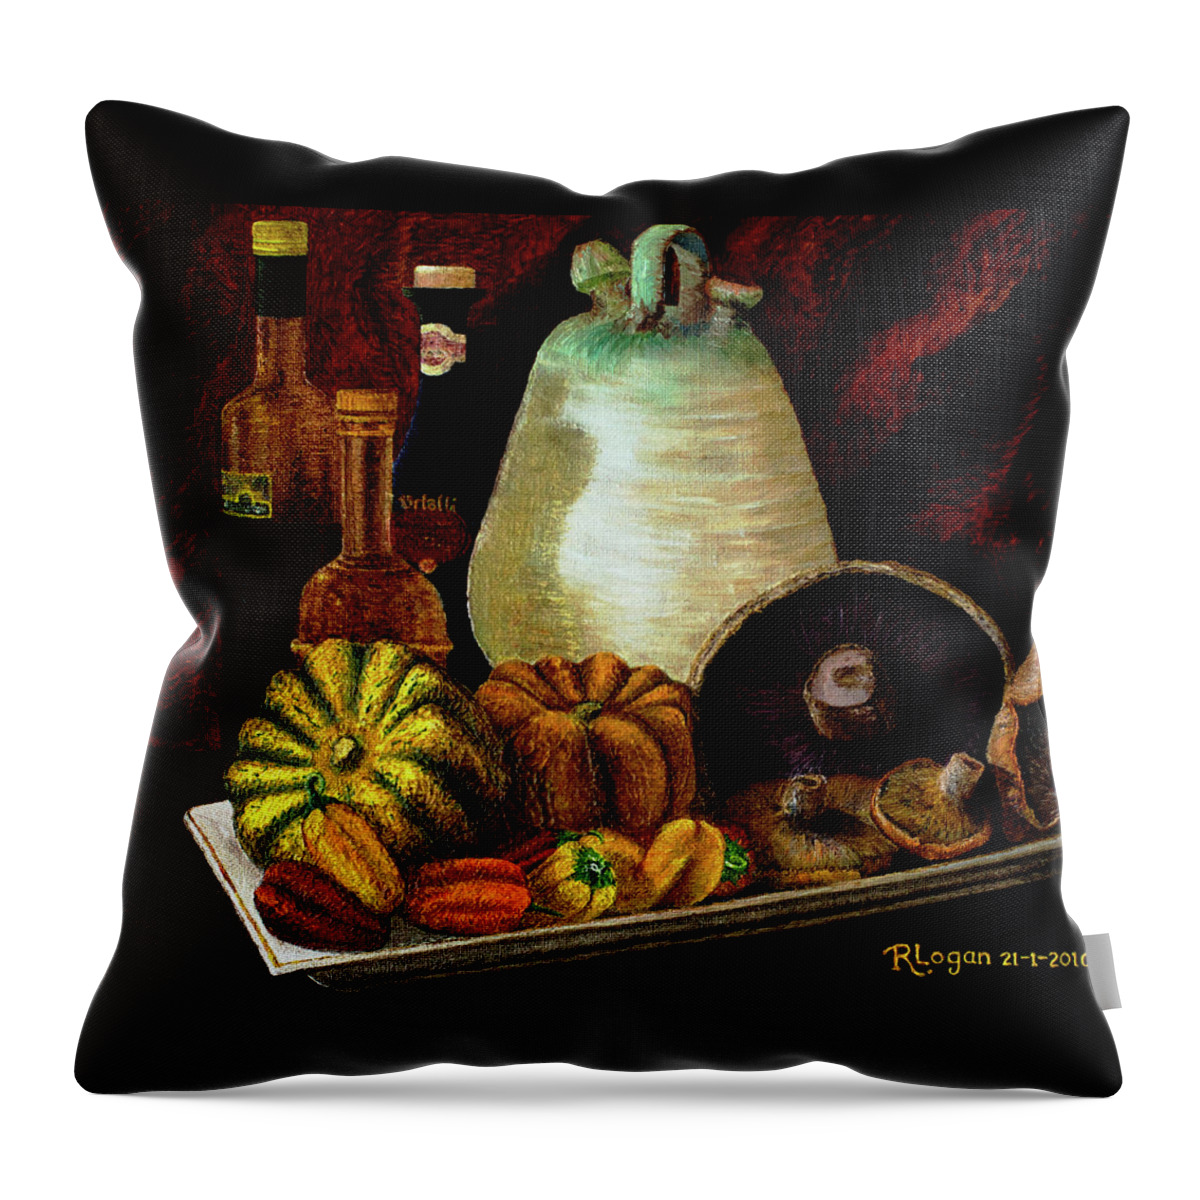 Food Throw Pillow featuring the painting Savor by Renee Logan